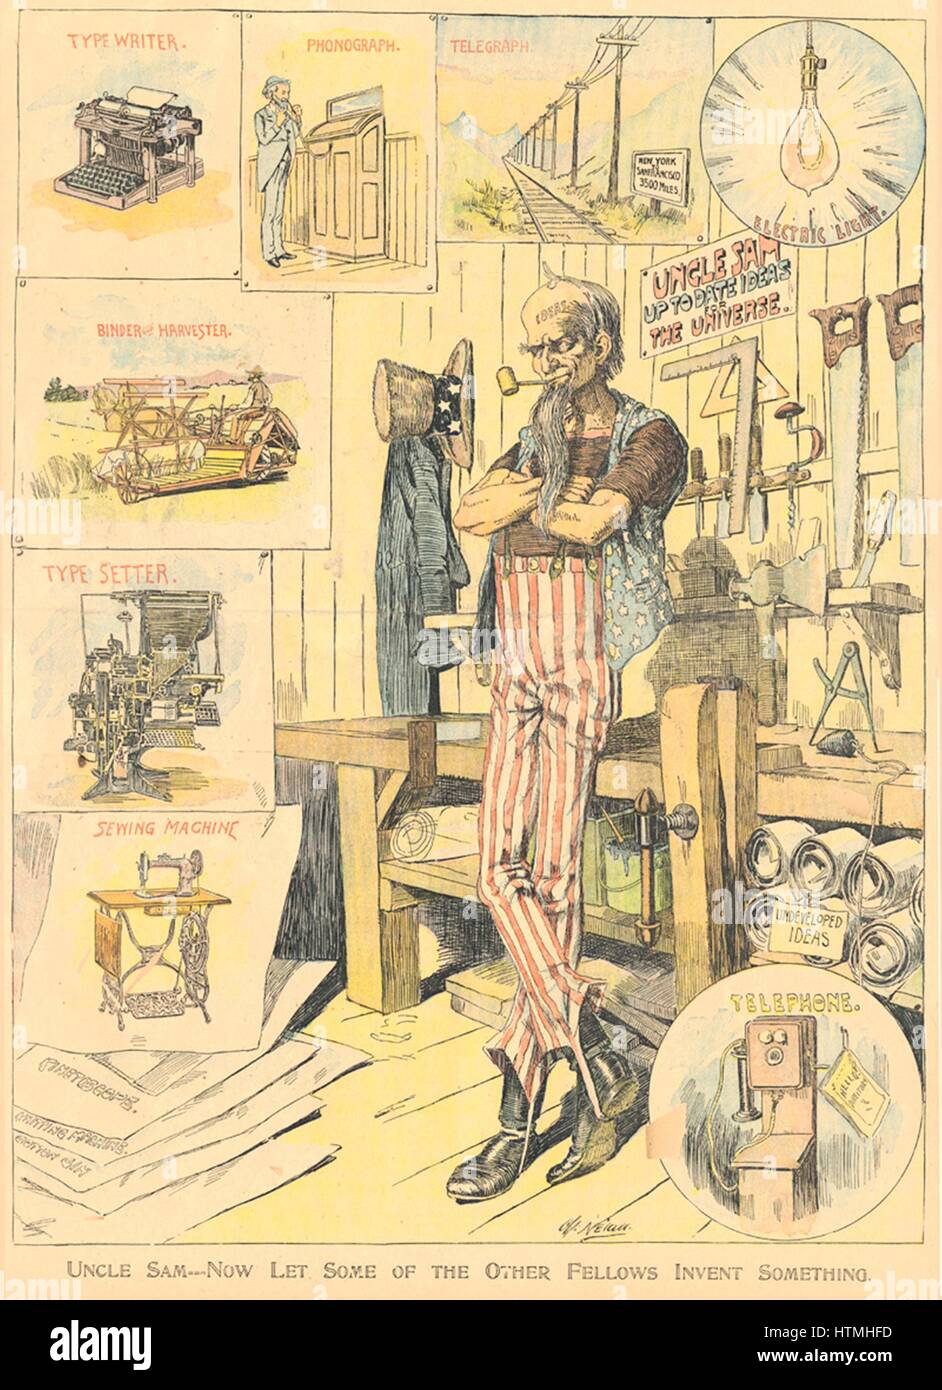 Uncle Sam--Now Let Some of the Other Fellows Invent Something by Charles Nelan, New York Herald, January 9, 1898. Colour Sunday supplements were important weapons in the newspaper wars of the late nineteenth century and many featured somewhat jingoistic c Stock Photo